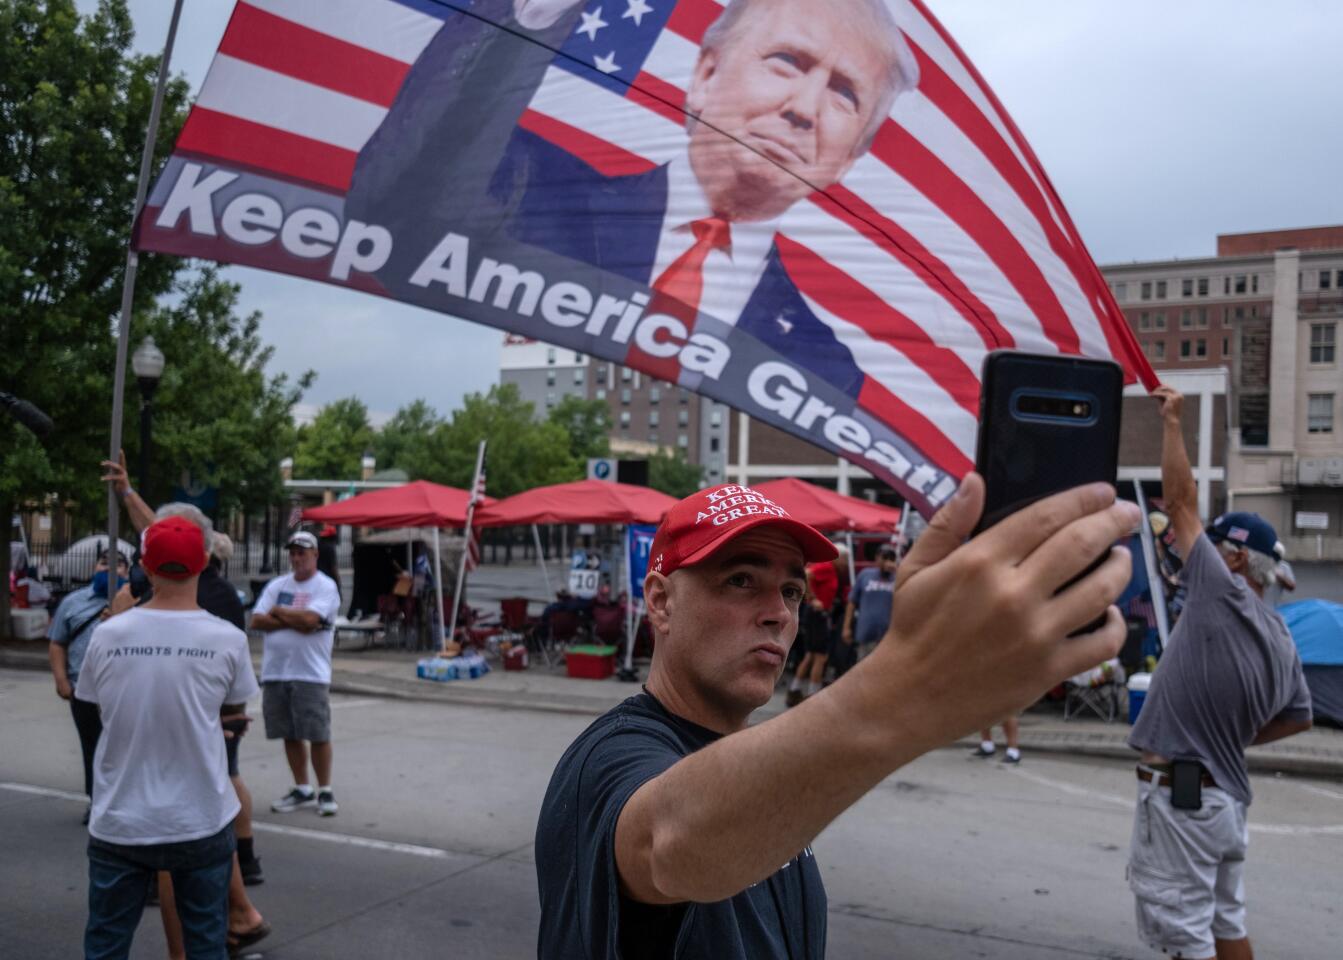 A supporter of President Trump takes a selfie near the BOK Center in Tulsa.